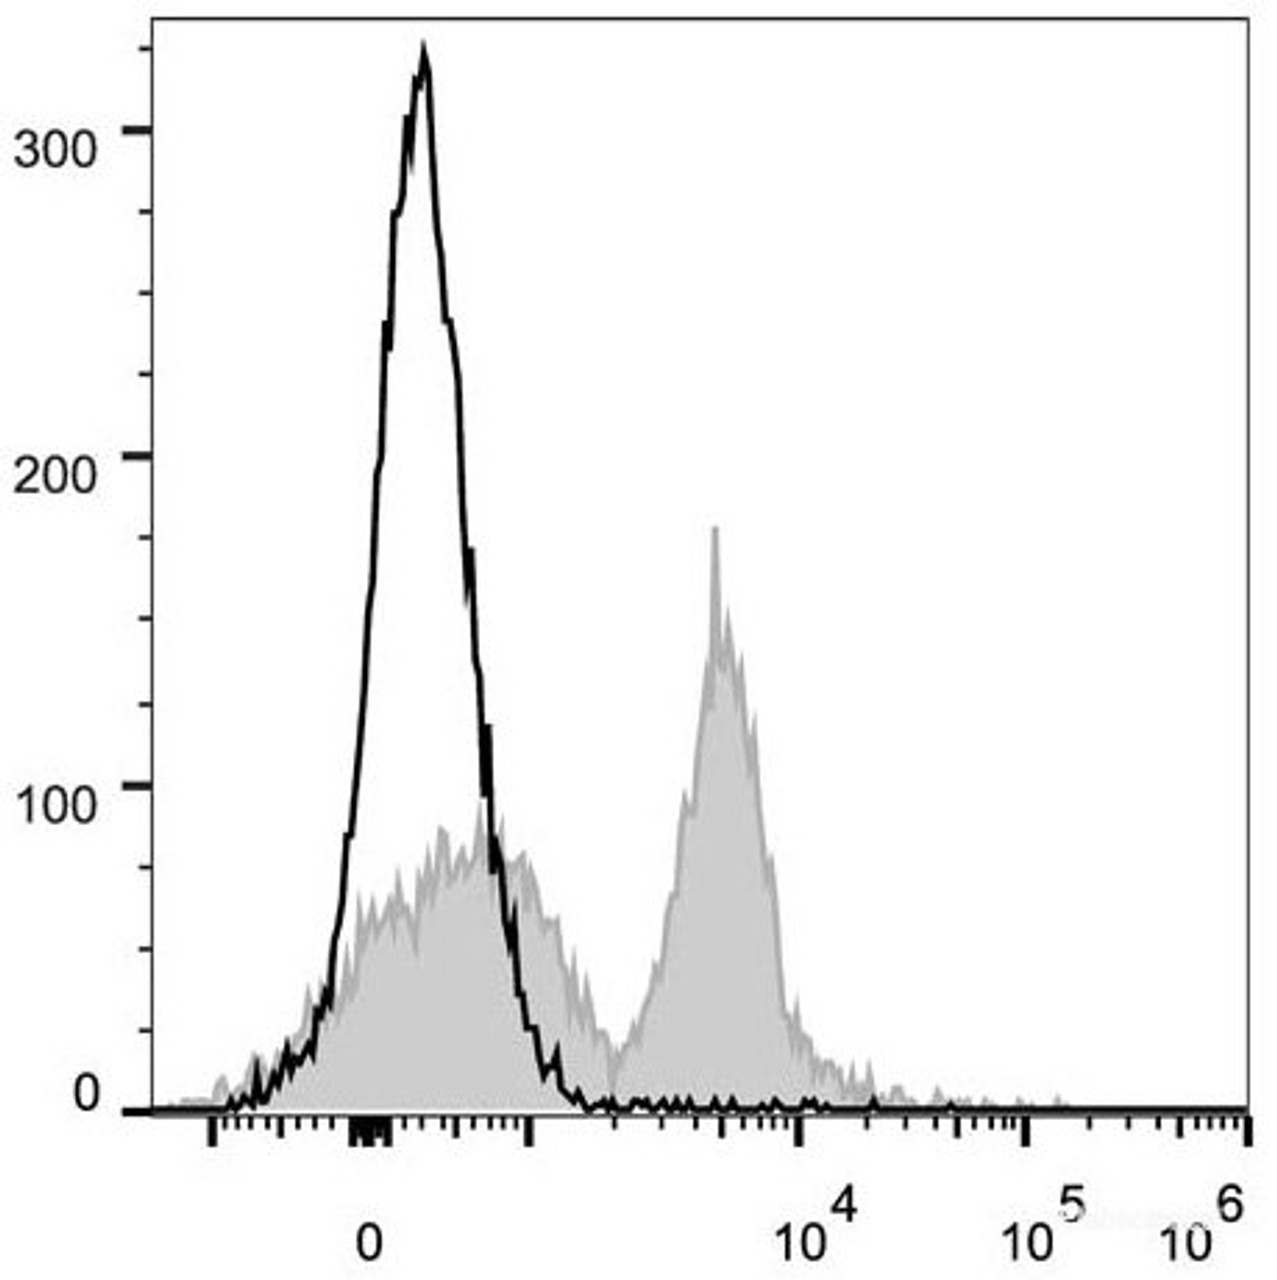 C57BL/6 murine splenocytes are stained with PE/Cyanine5 Anti-Mouse CD4 Antibody[Used at .2 μg/1<sup>6</sup> cells dilution](filled gray histogram). Unstained splenocytes (empty black histogram) are used as control.